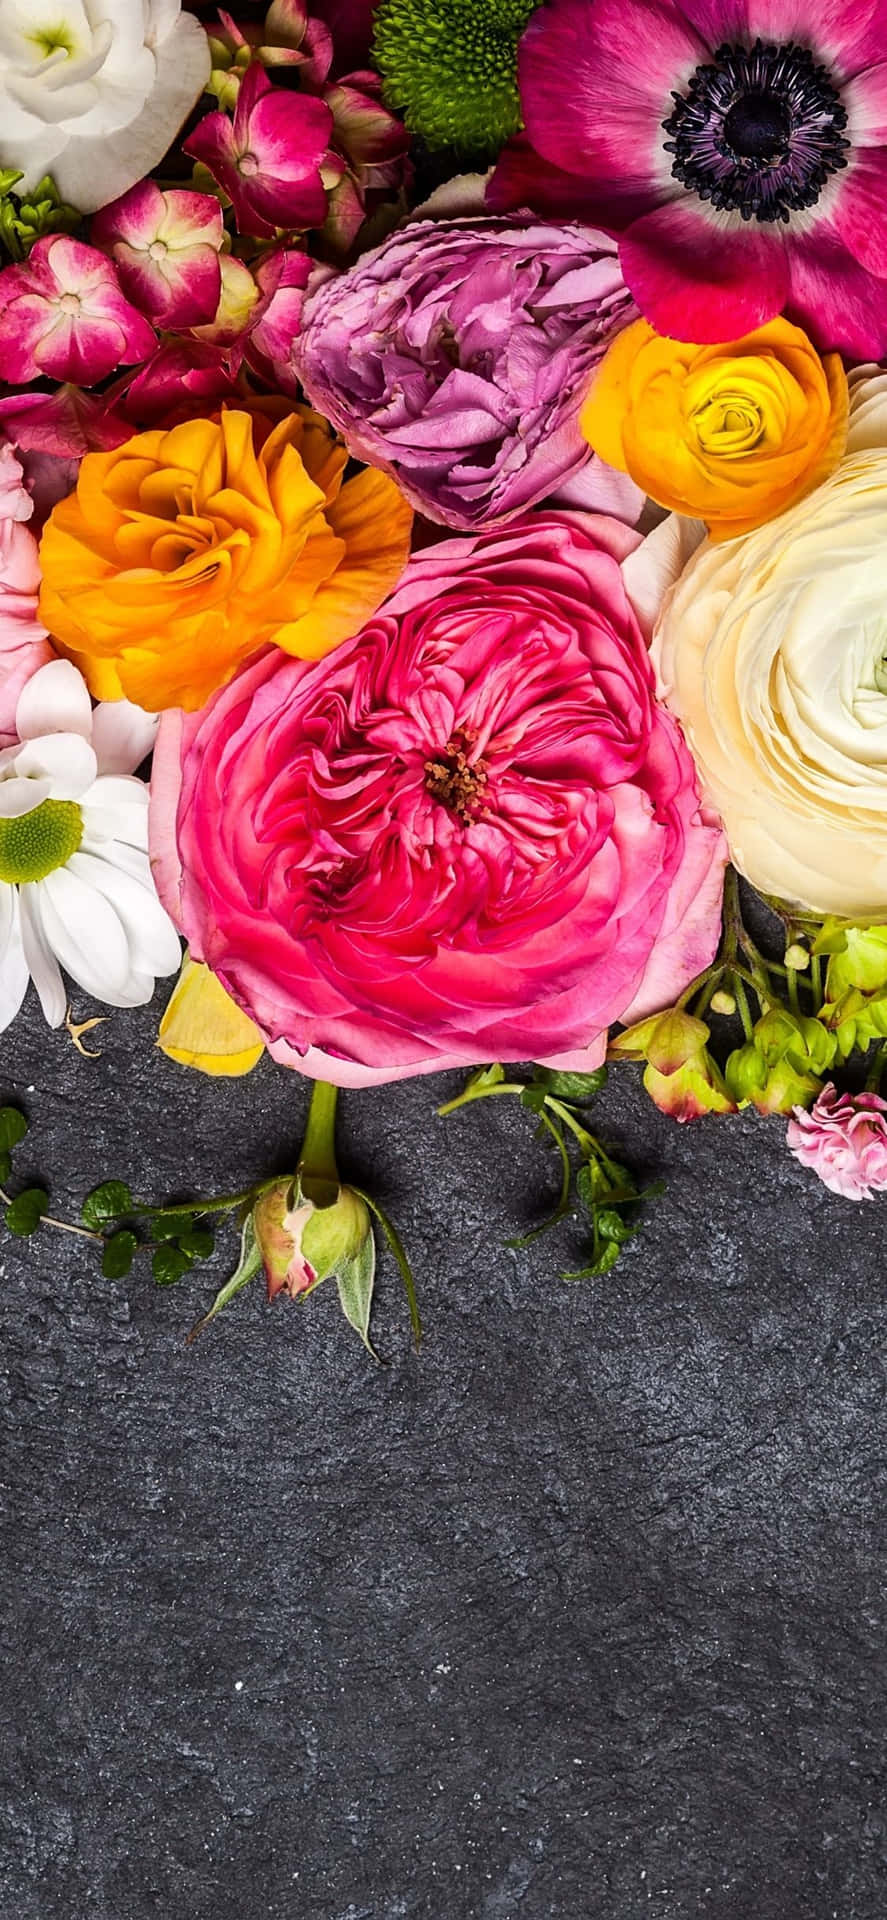 A Vibrant Garden of Colorful Flowers for Your Iphone Wallpaper